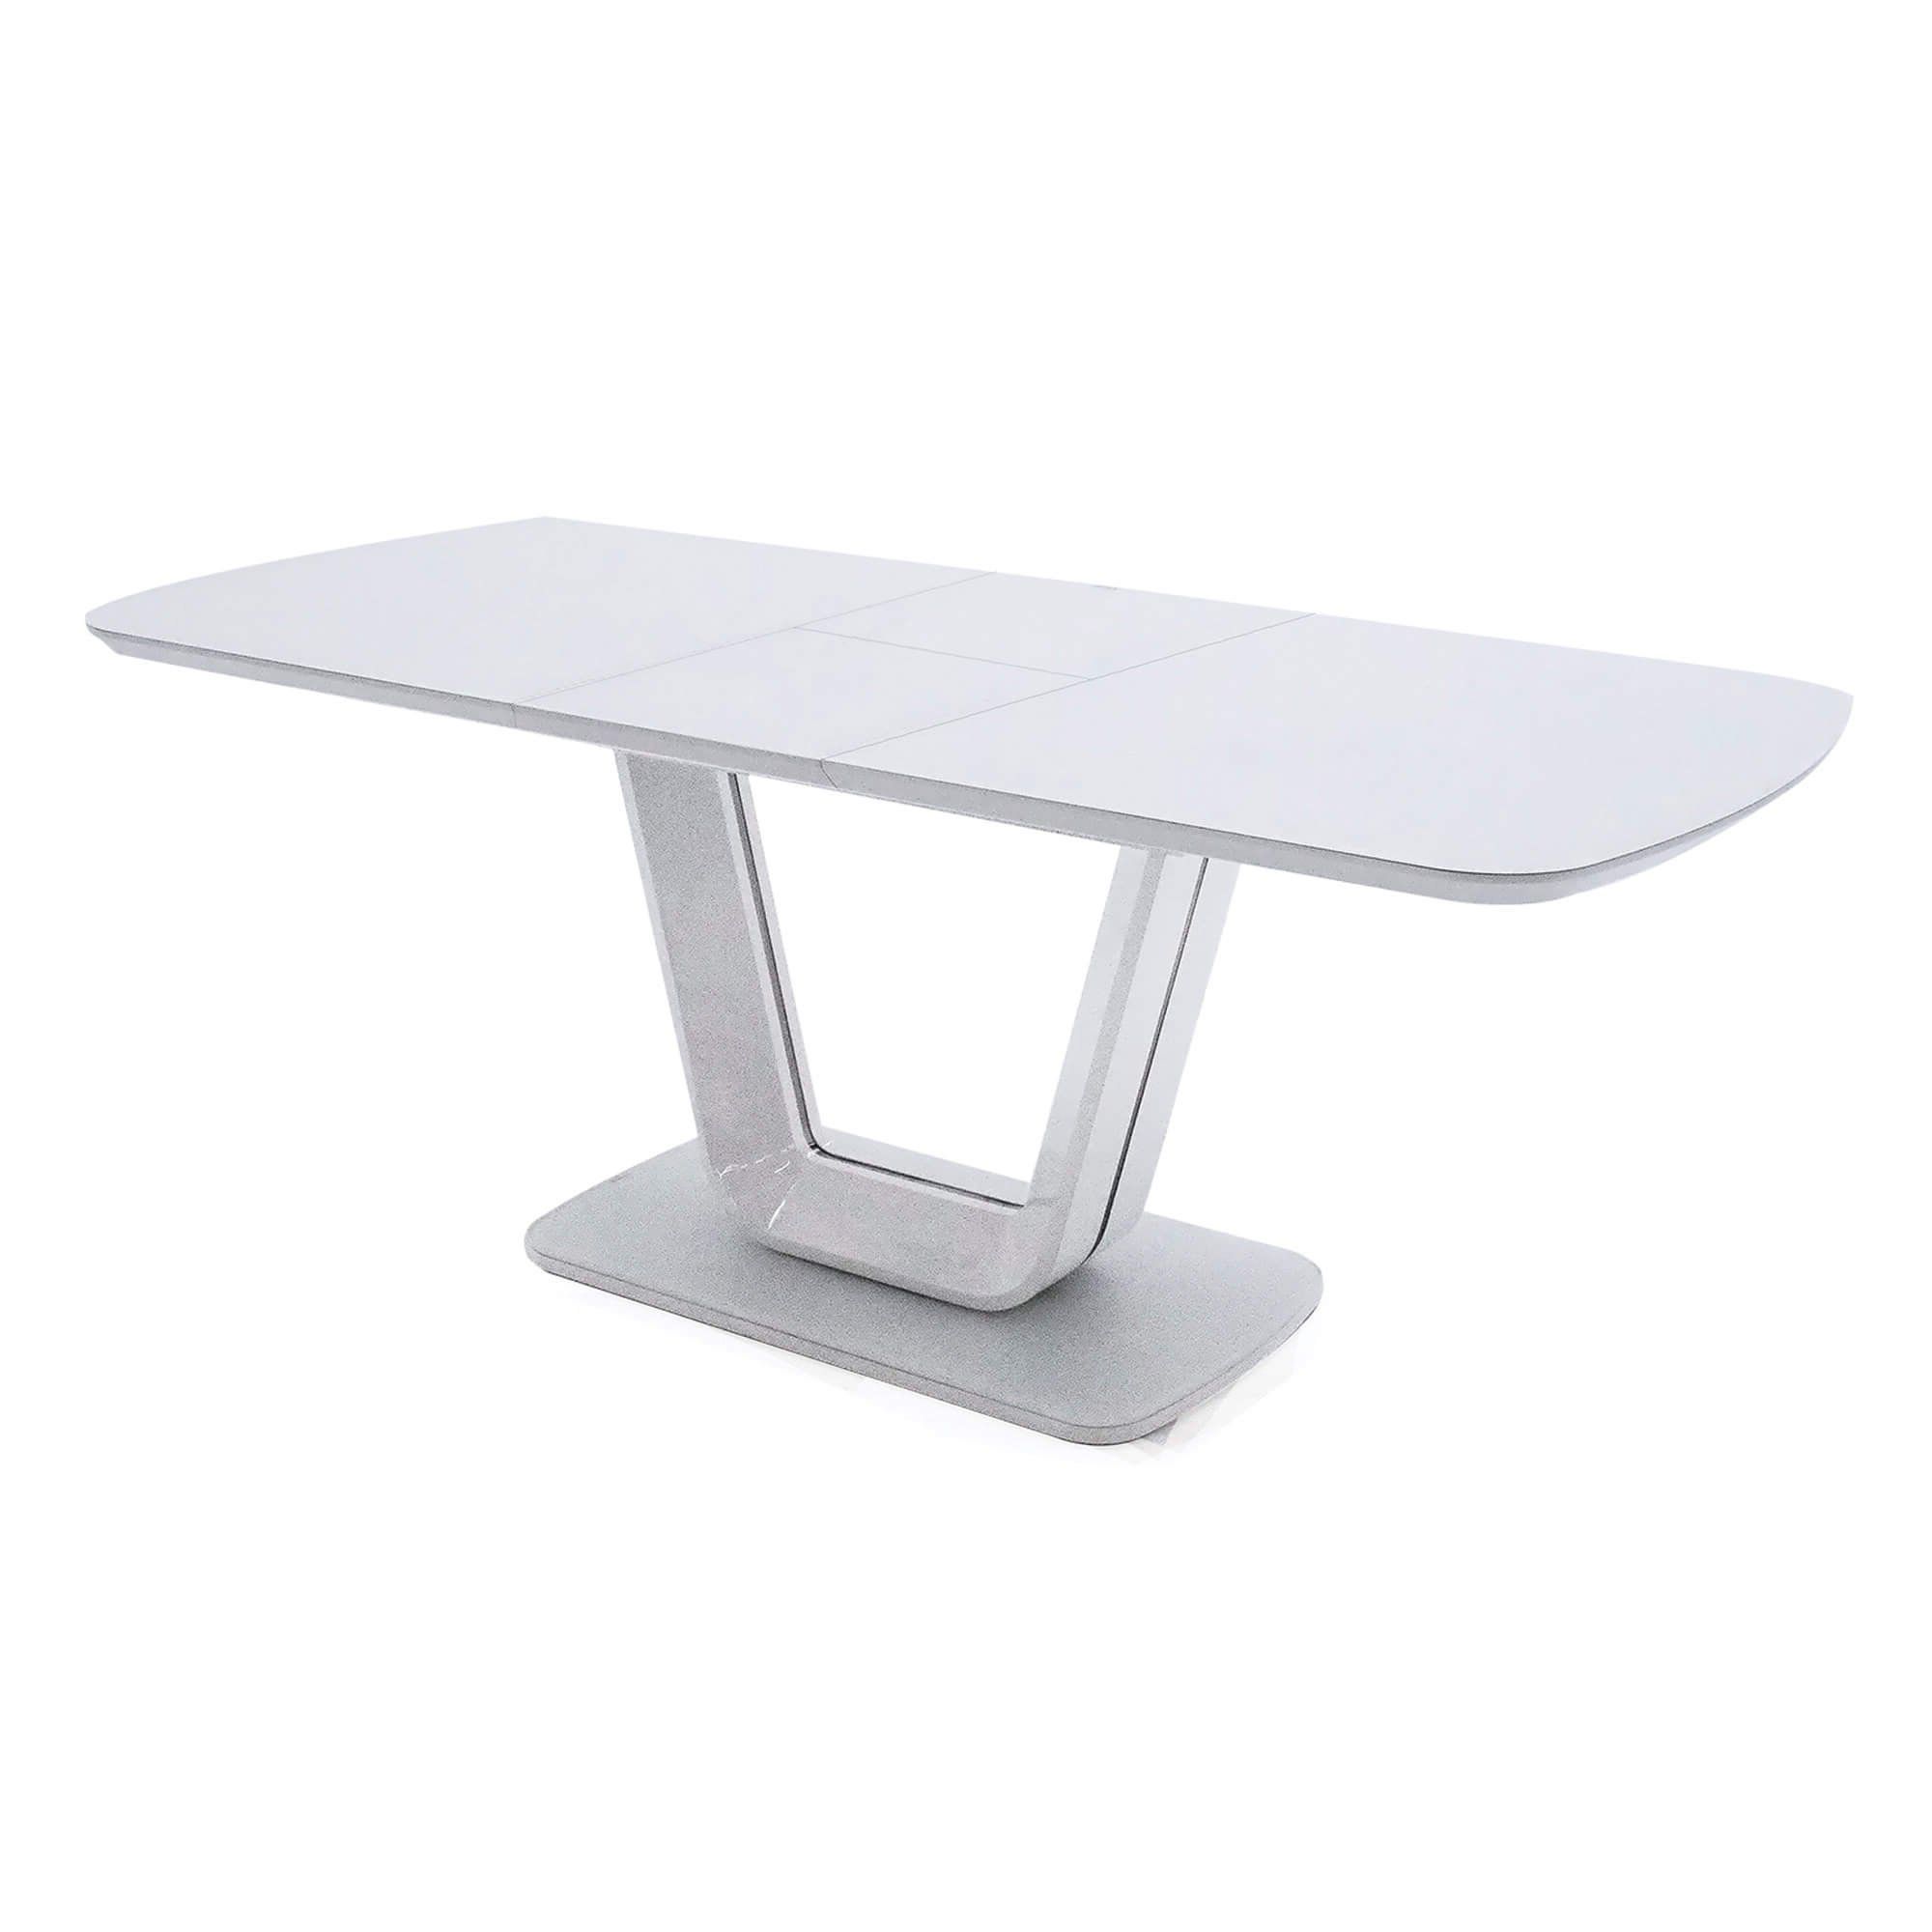 Preferred Ultimate White High Gloss 160cm Extending Dining Table Inside High Gloss Outdoor Tables (View 14 of 15)